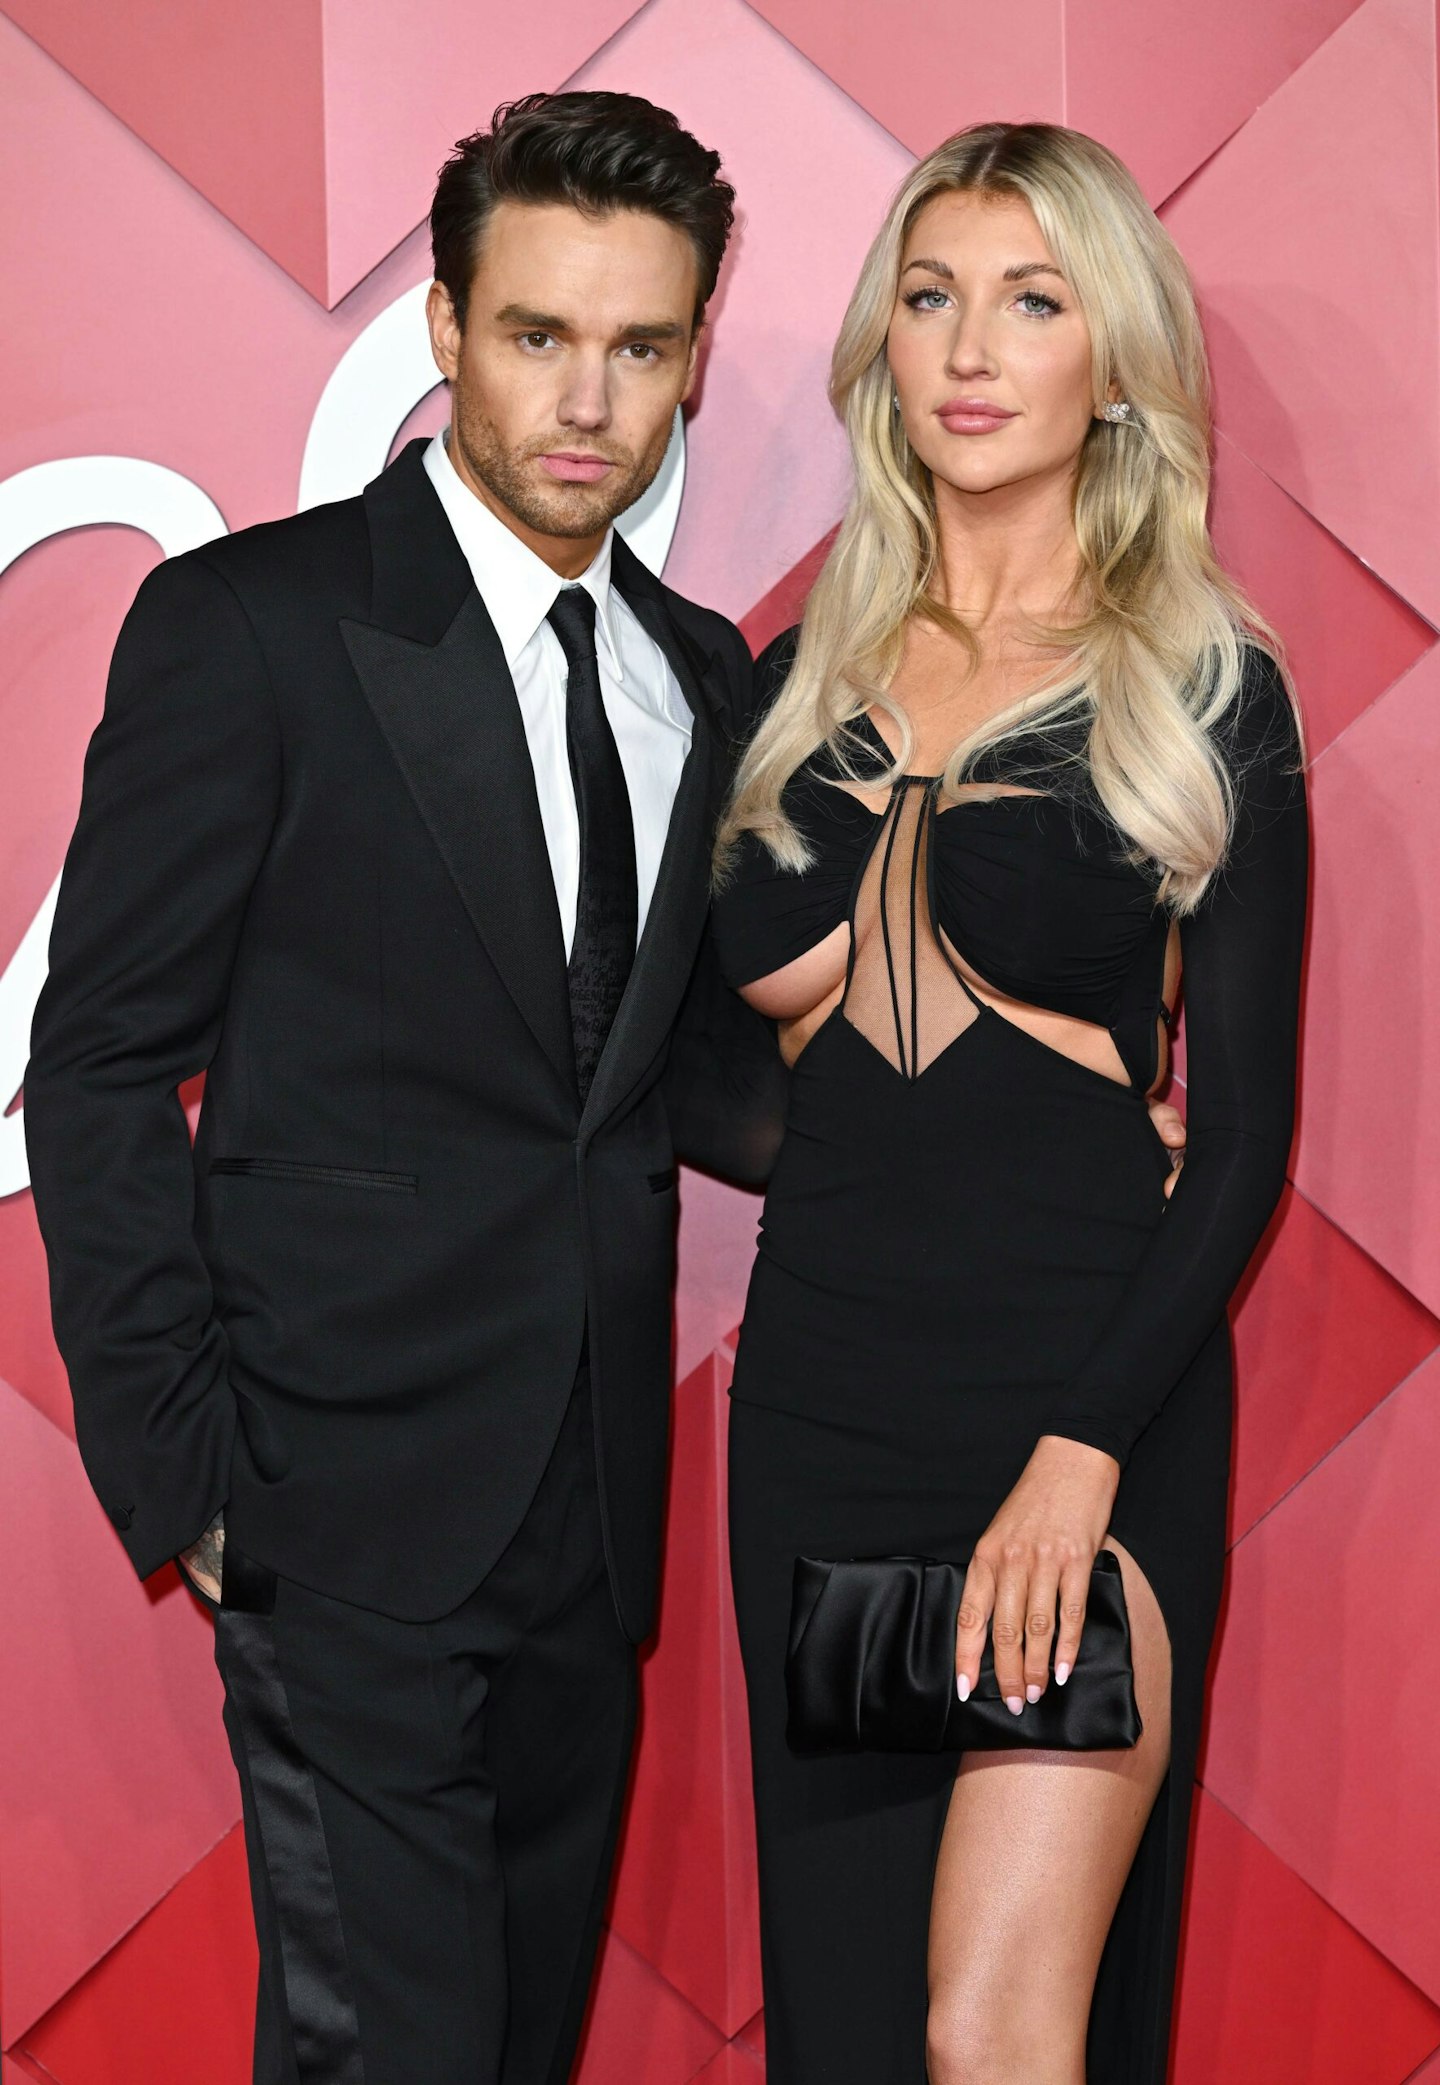 Liam Payne and girlfriend Kate Cassidy pose in formal clothes